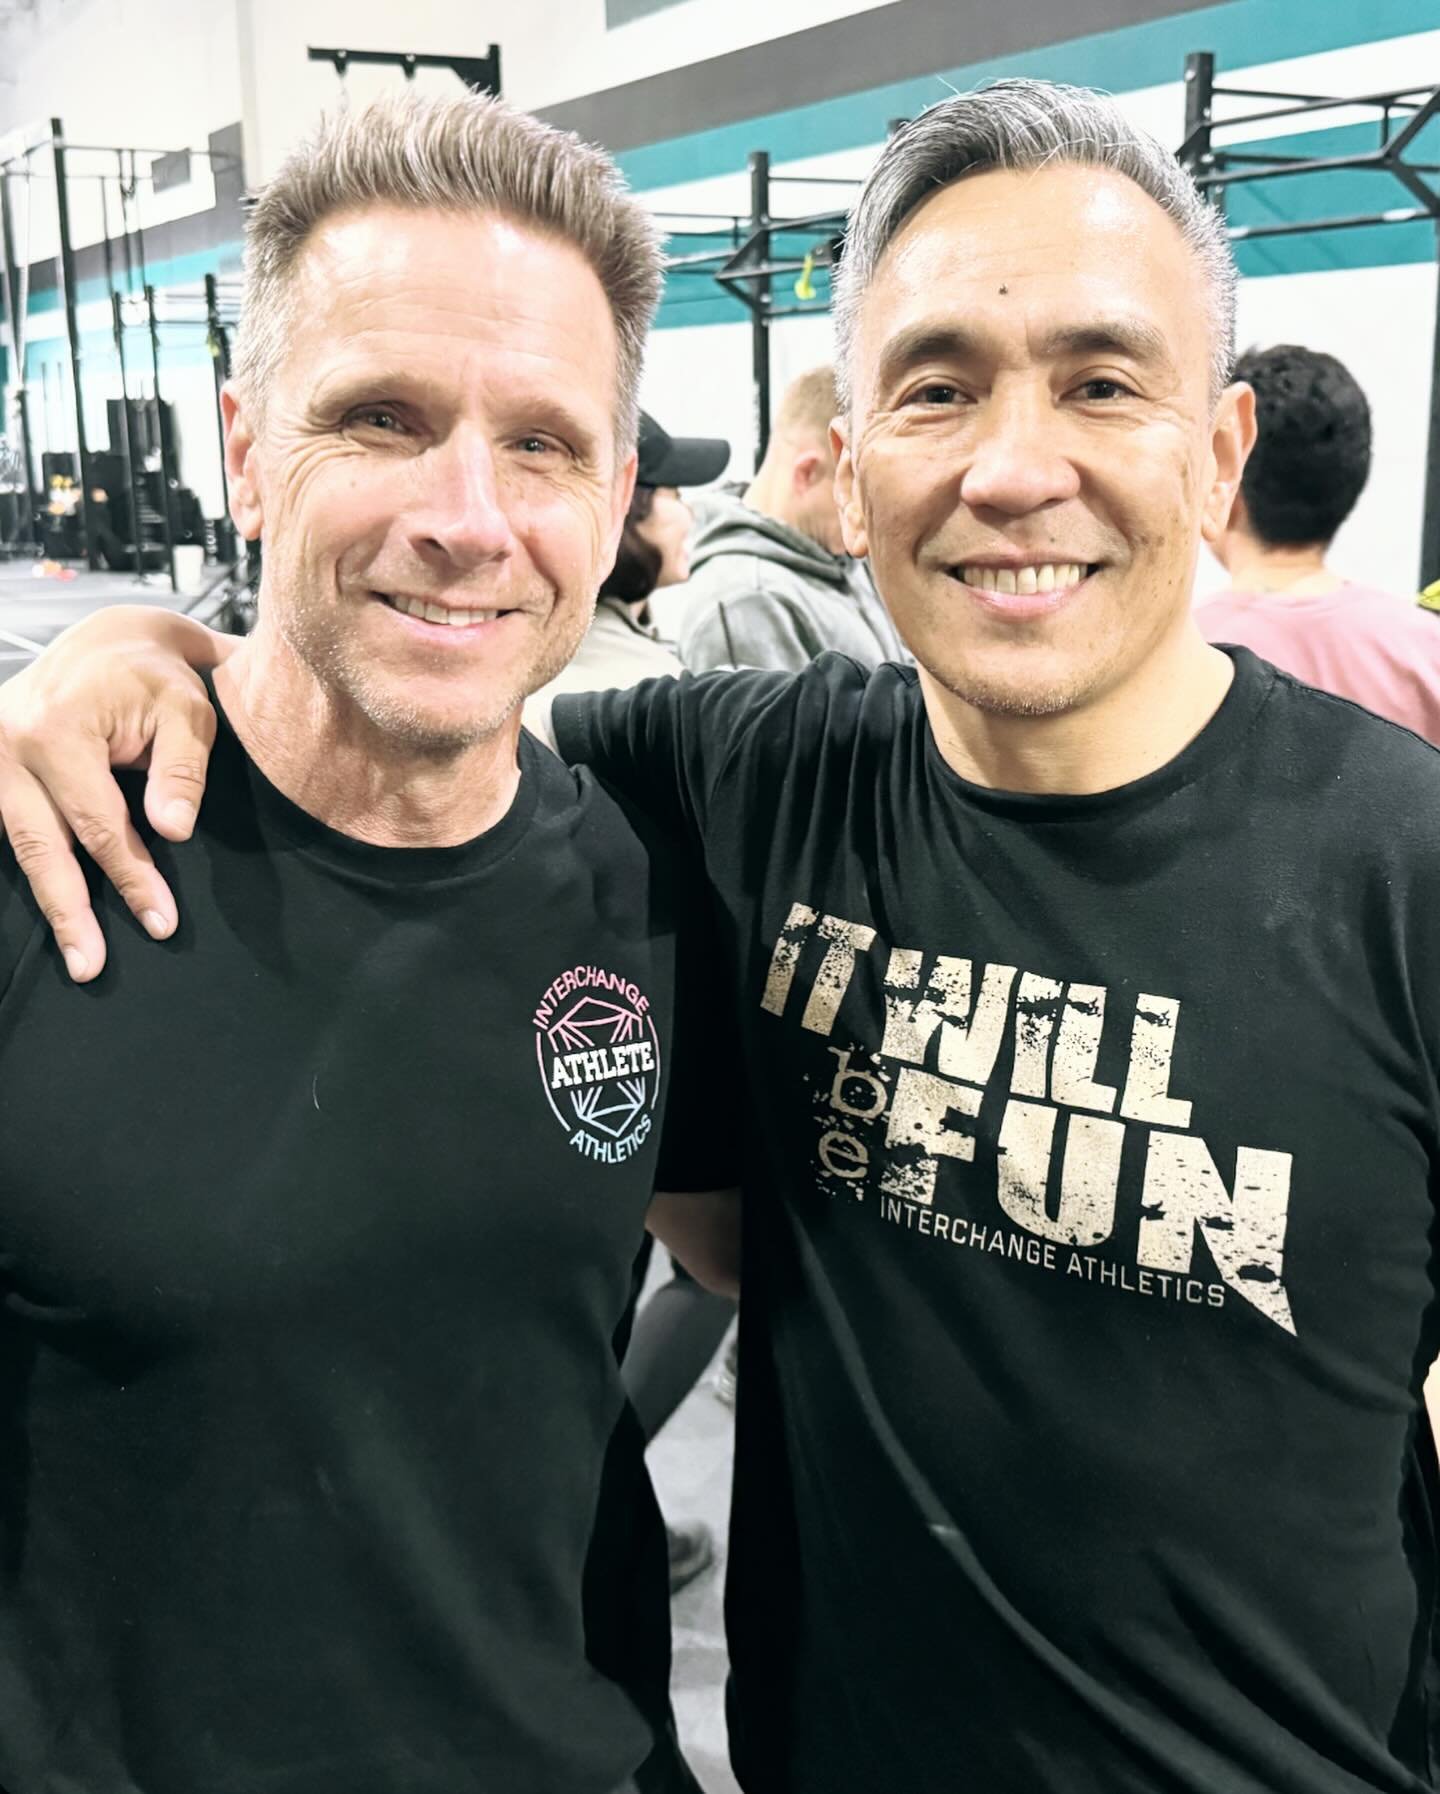 Special shoutout to these two OG&rsquo;s (old guys😂). They showed up on Saturday to @trialbuiltcrossfit for their comp just like they show up regularly to the gym. They are regular competitors and compete against athletes that can be 30+ years young